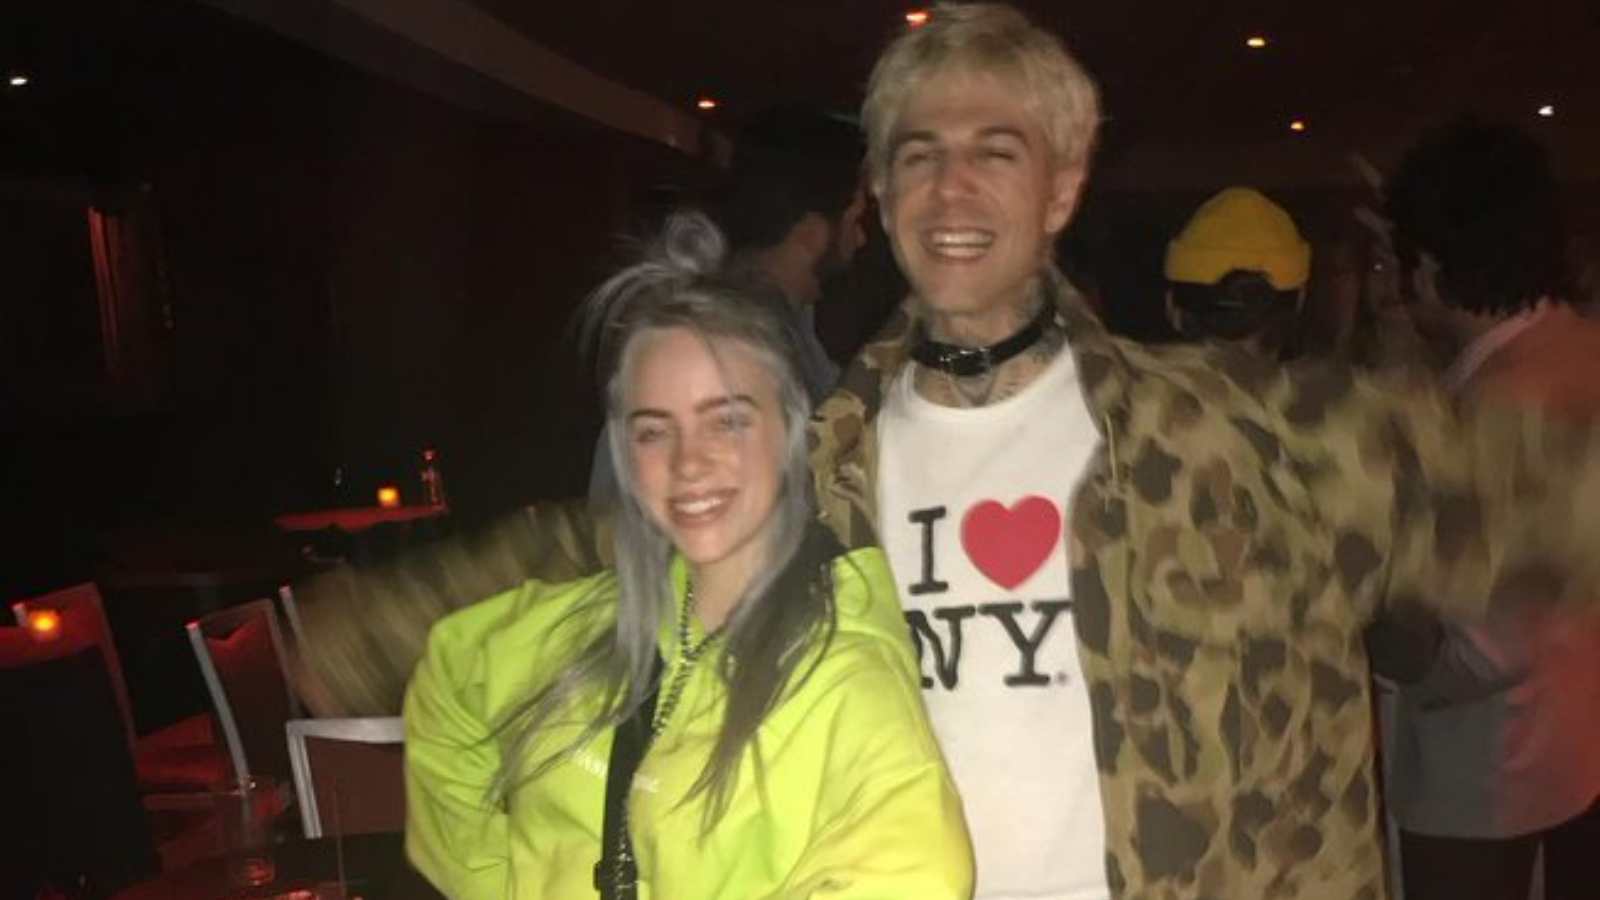 Billie Eilish and Jesse Rutherford during Halloween